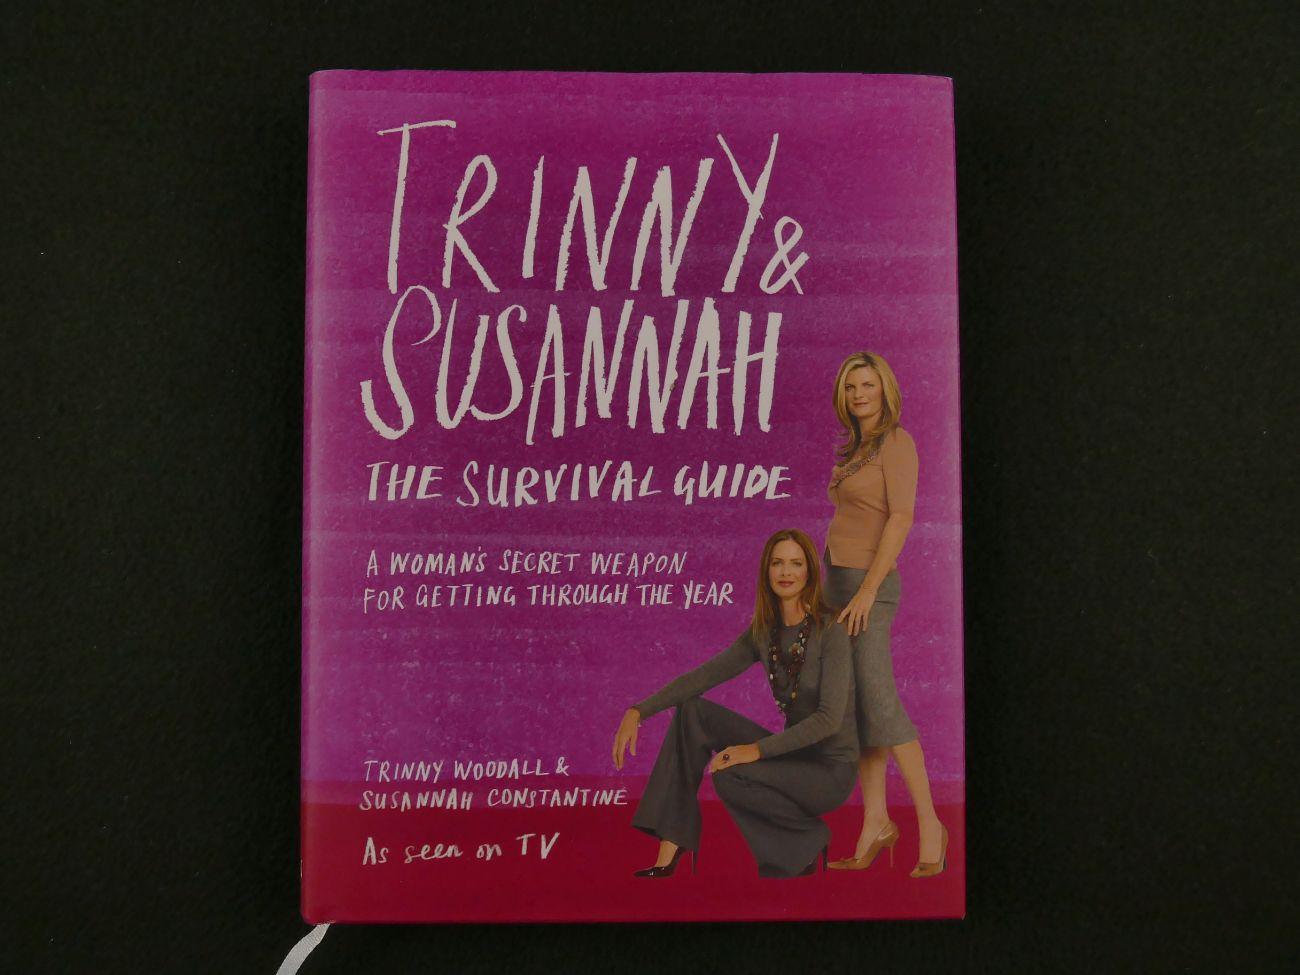 Woodall / Constantine - Nieuw - Trinny & Susannah. The survival guide. A woman's secret weapon for getting through the year (4 foto's)